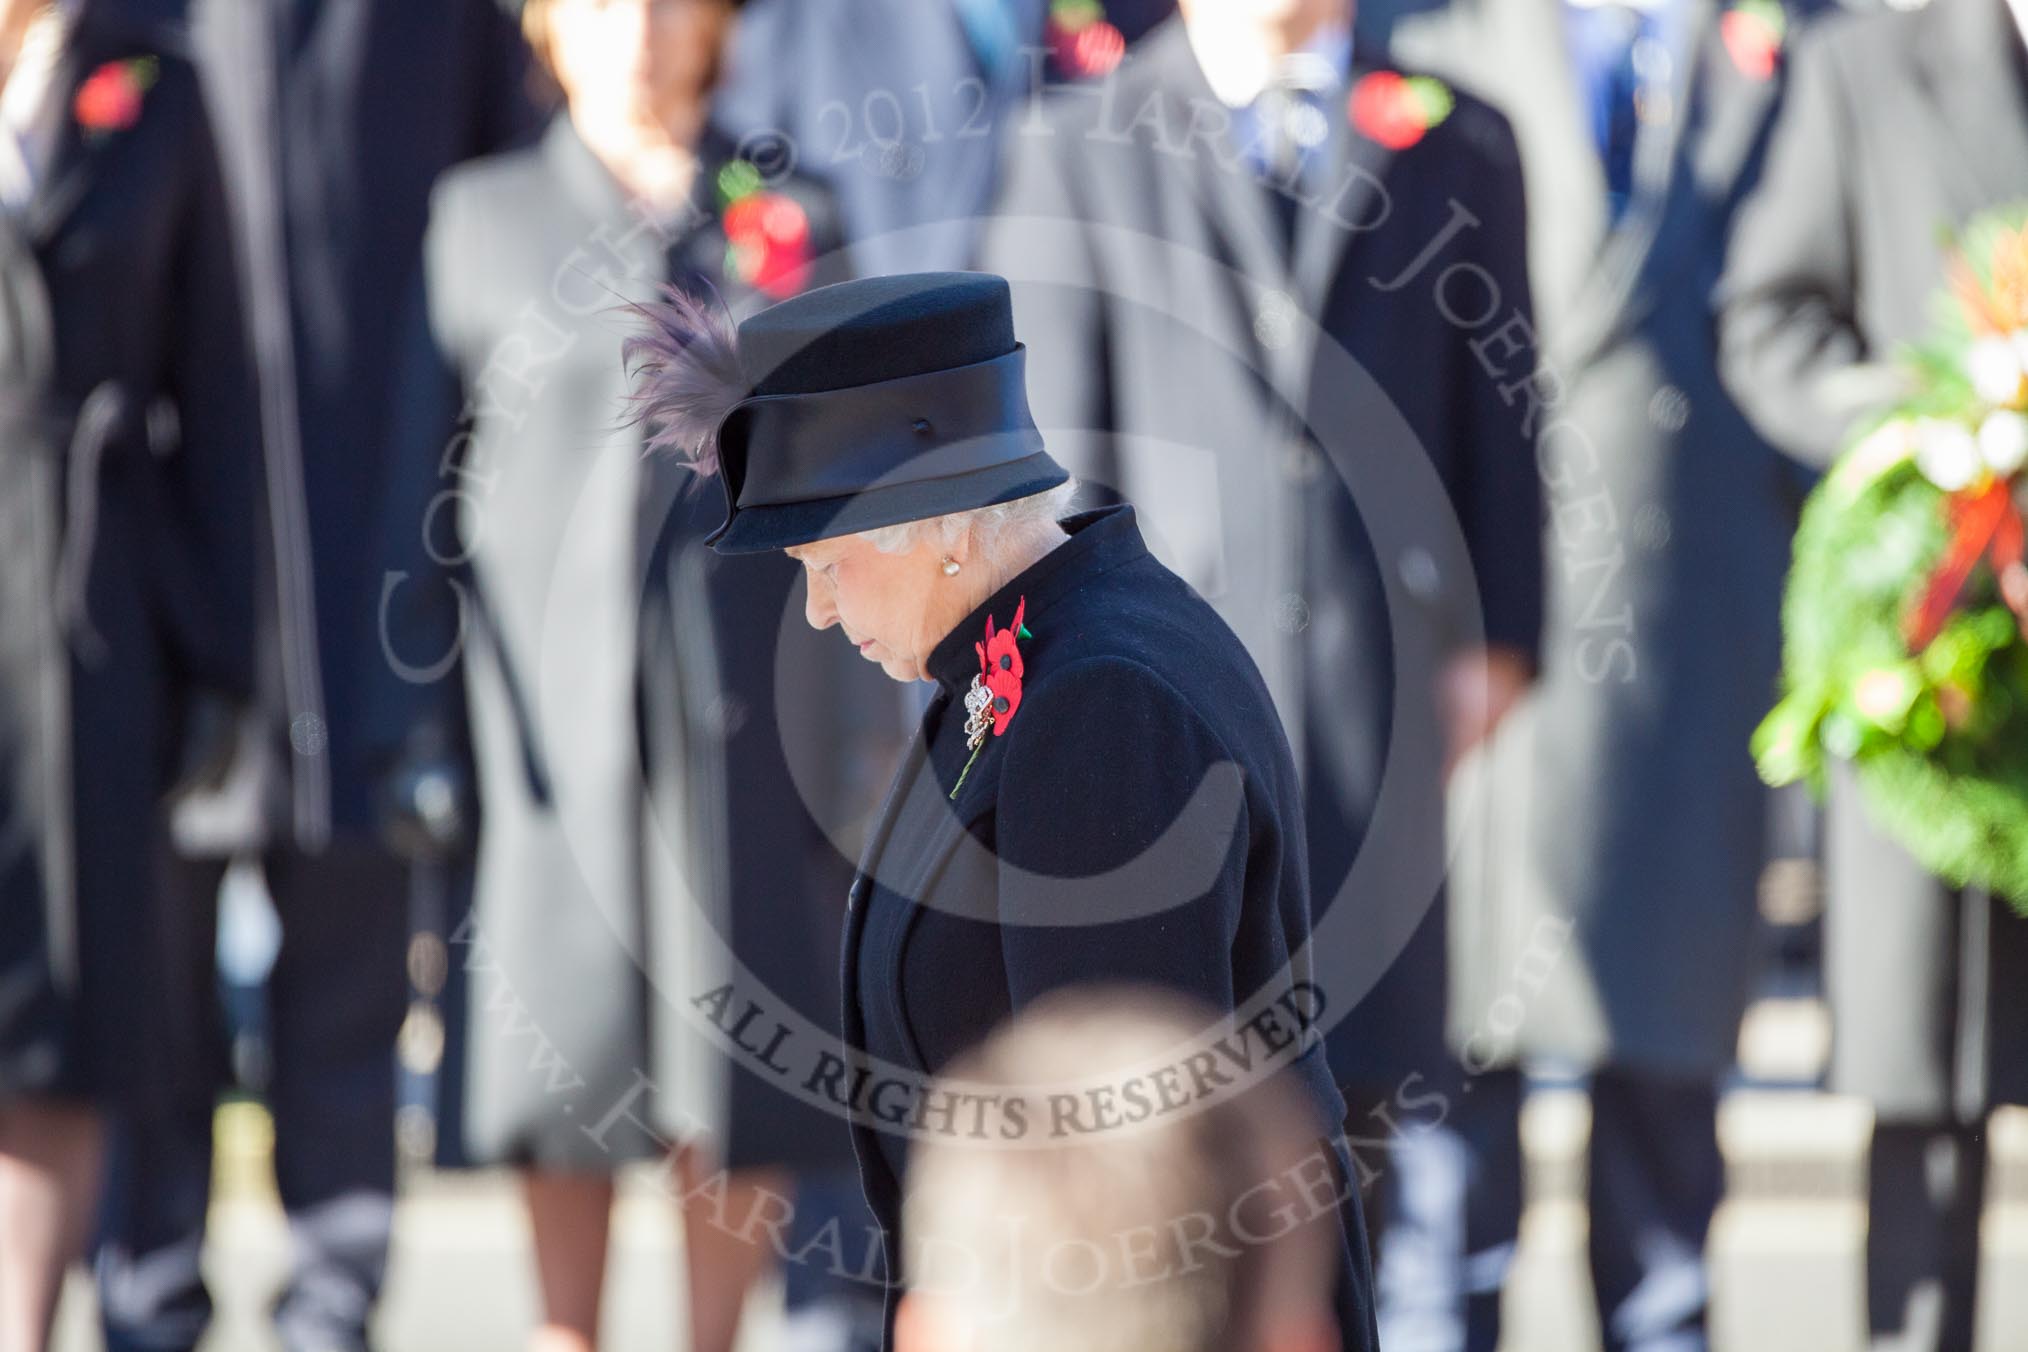 HM The Queen, bowing in respect after having laid her wreath at the Cenotaph.